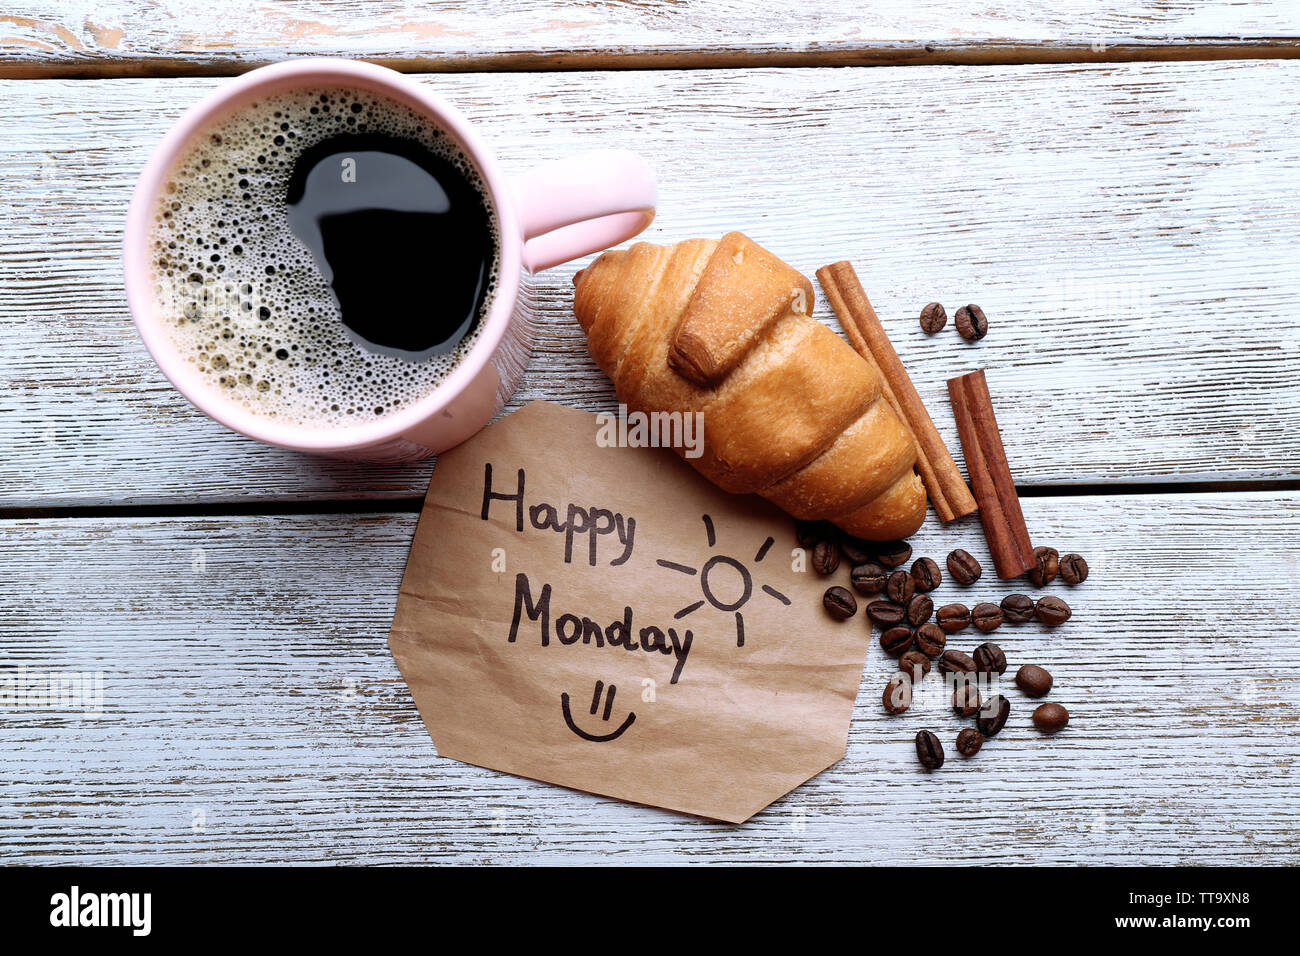 Cup of coffee with fresh croissant and Happy Monday massage on ...